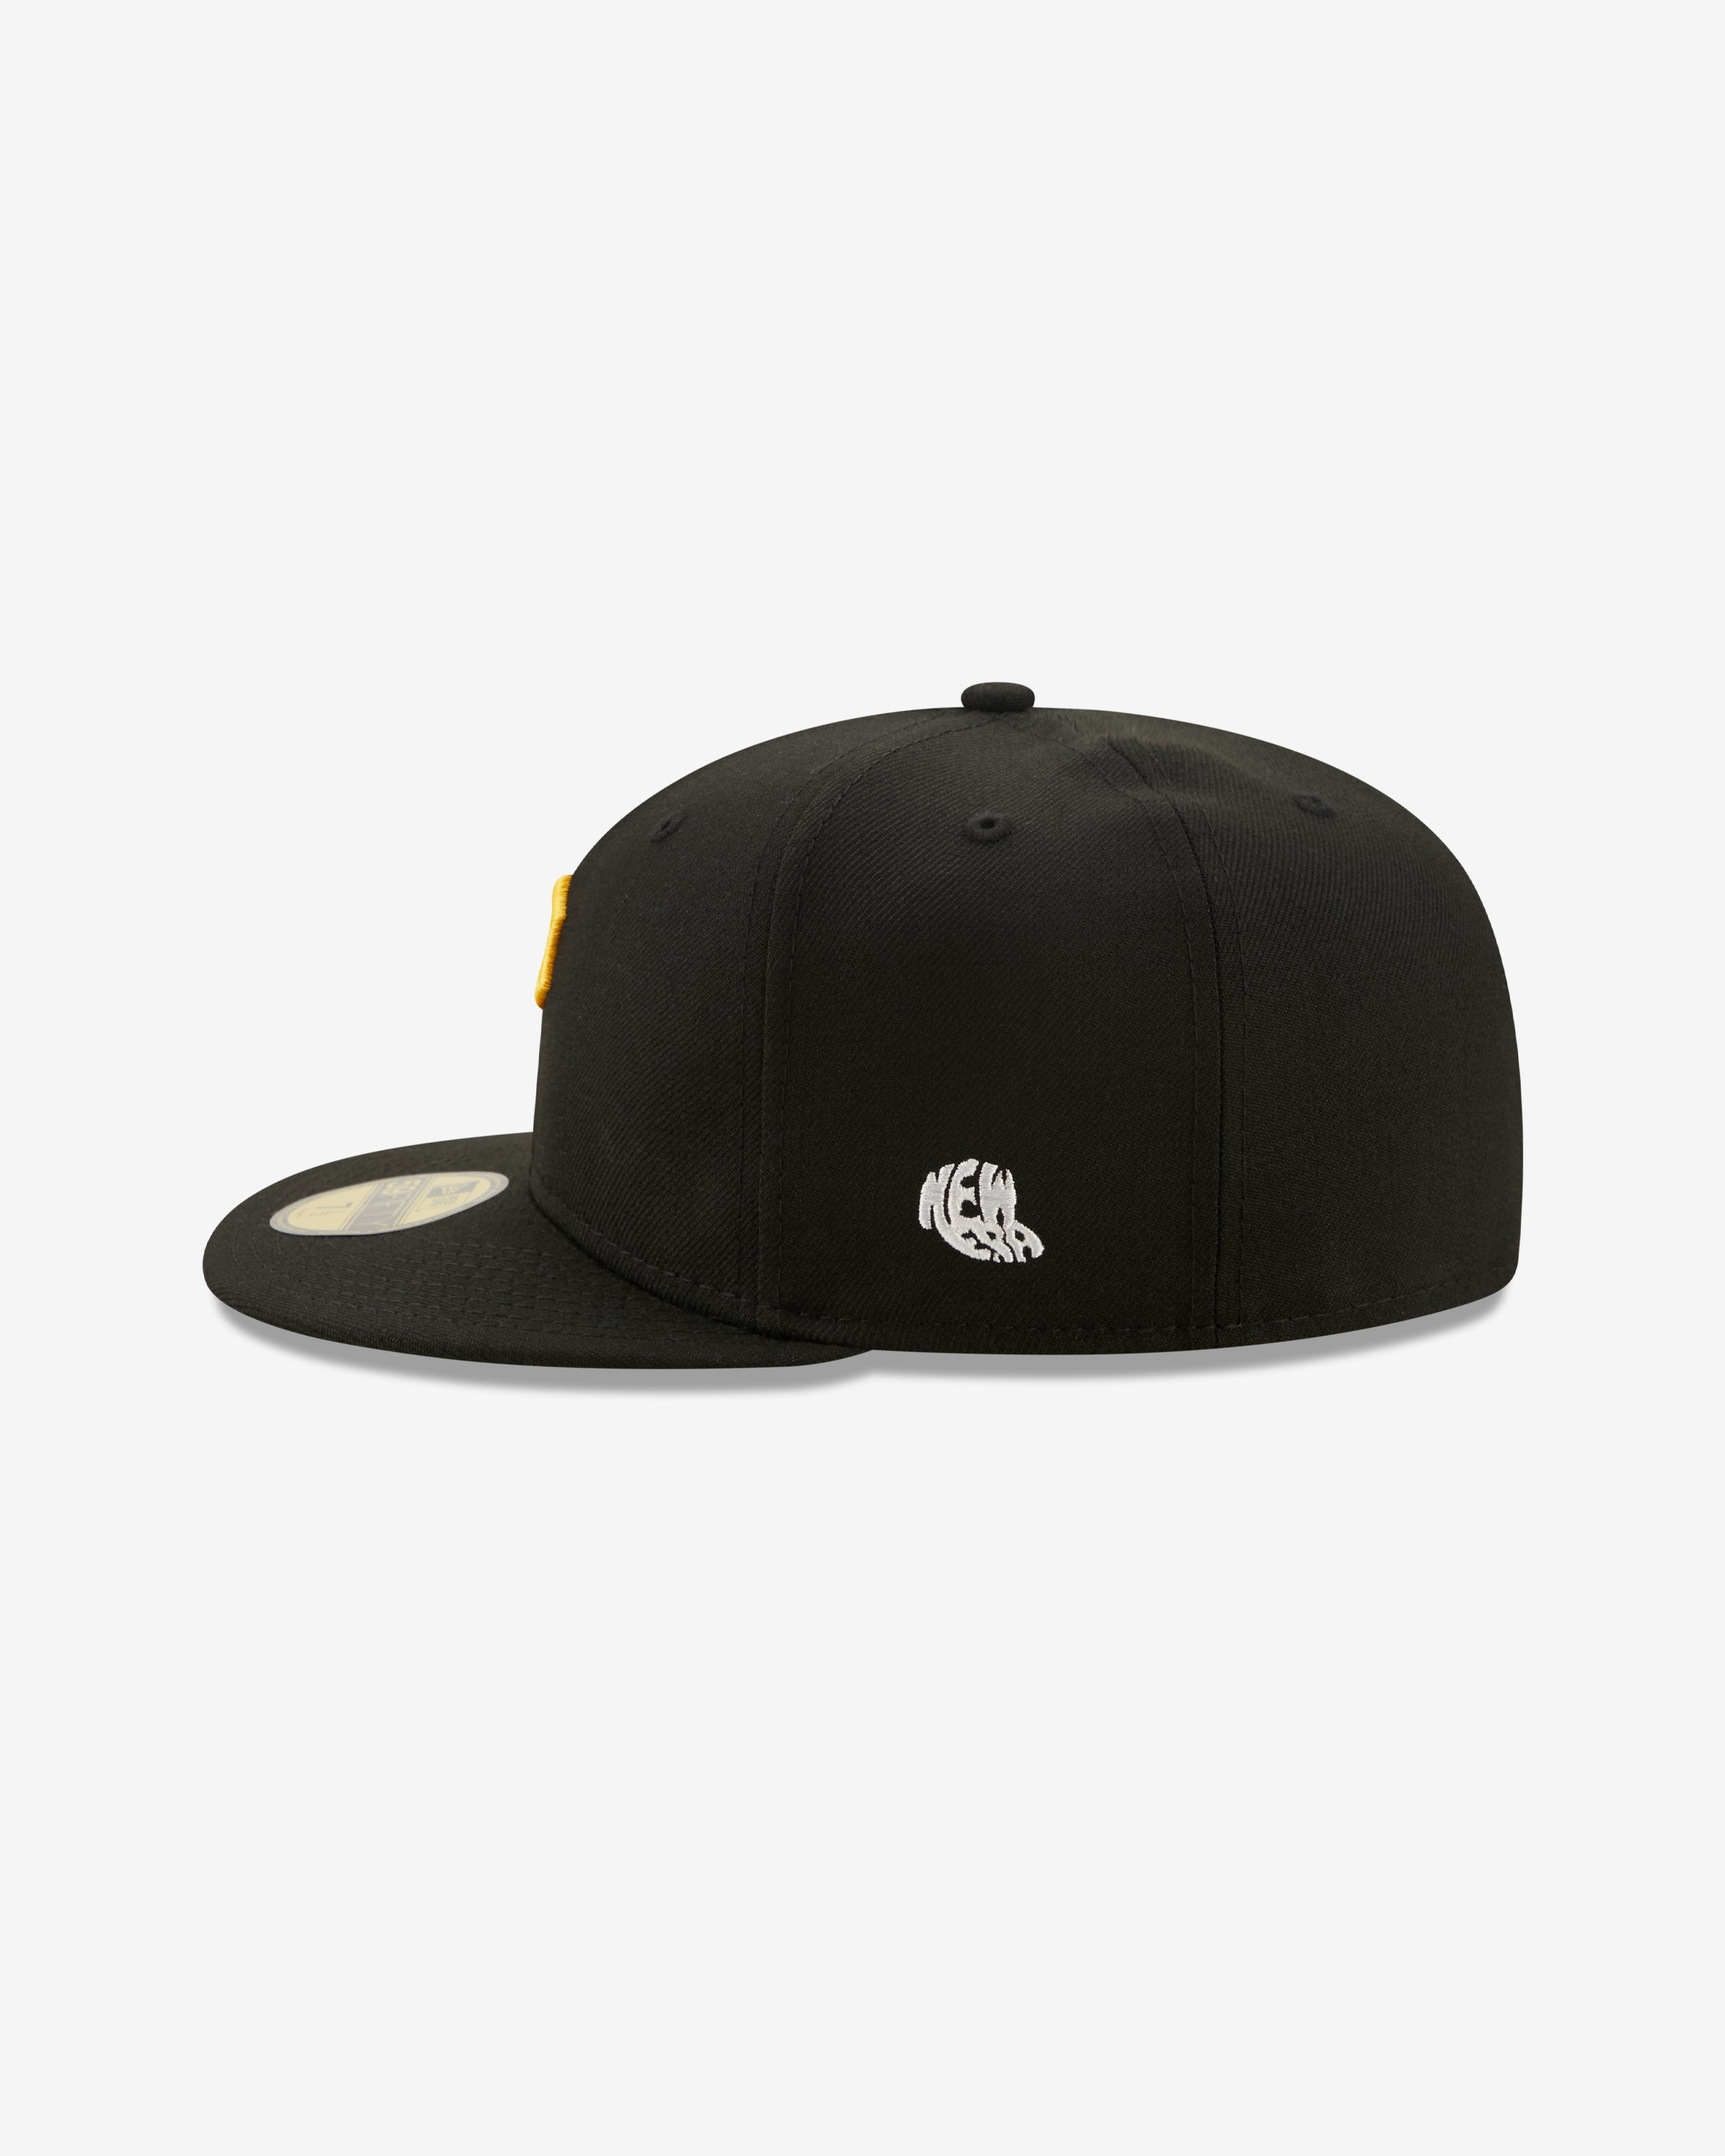 NEW ERA LOGO HISTORY 59FIFTY FITTED - PITTSBURGH PIRATES (1960)